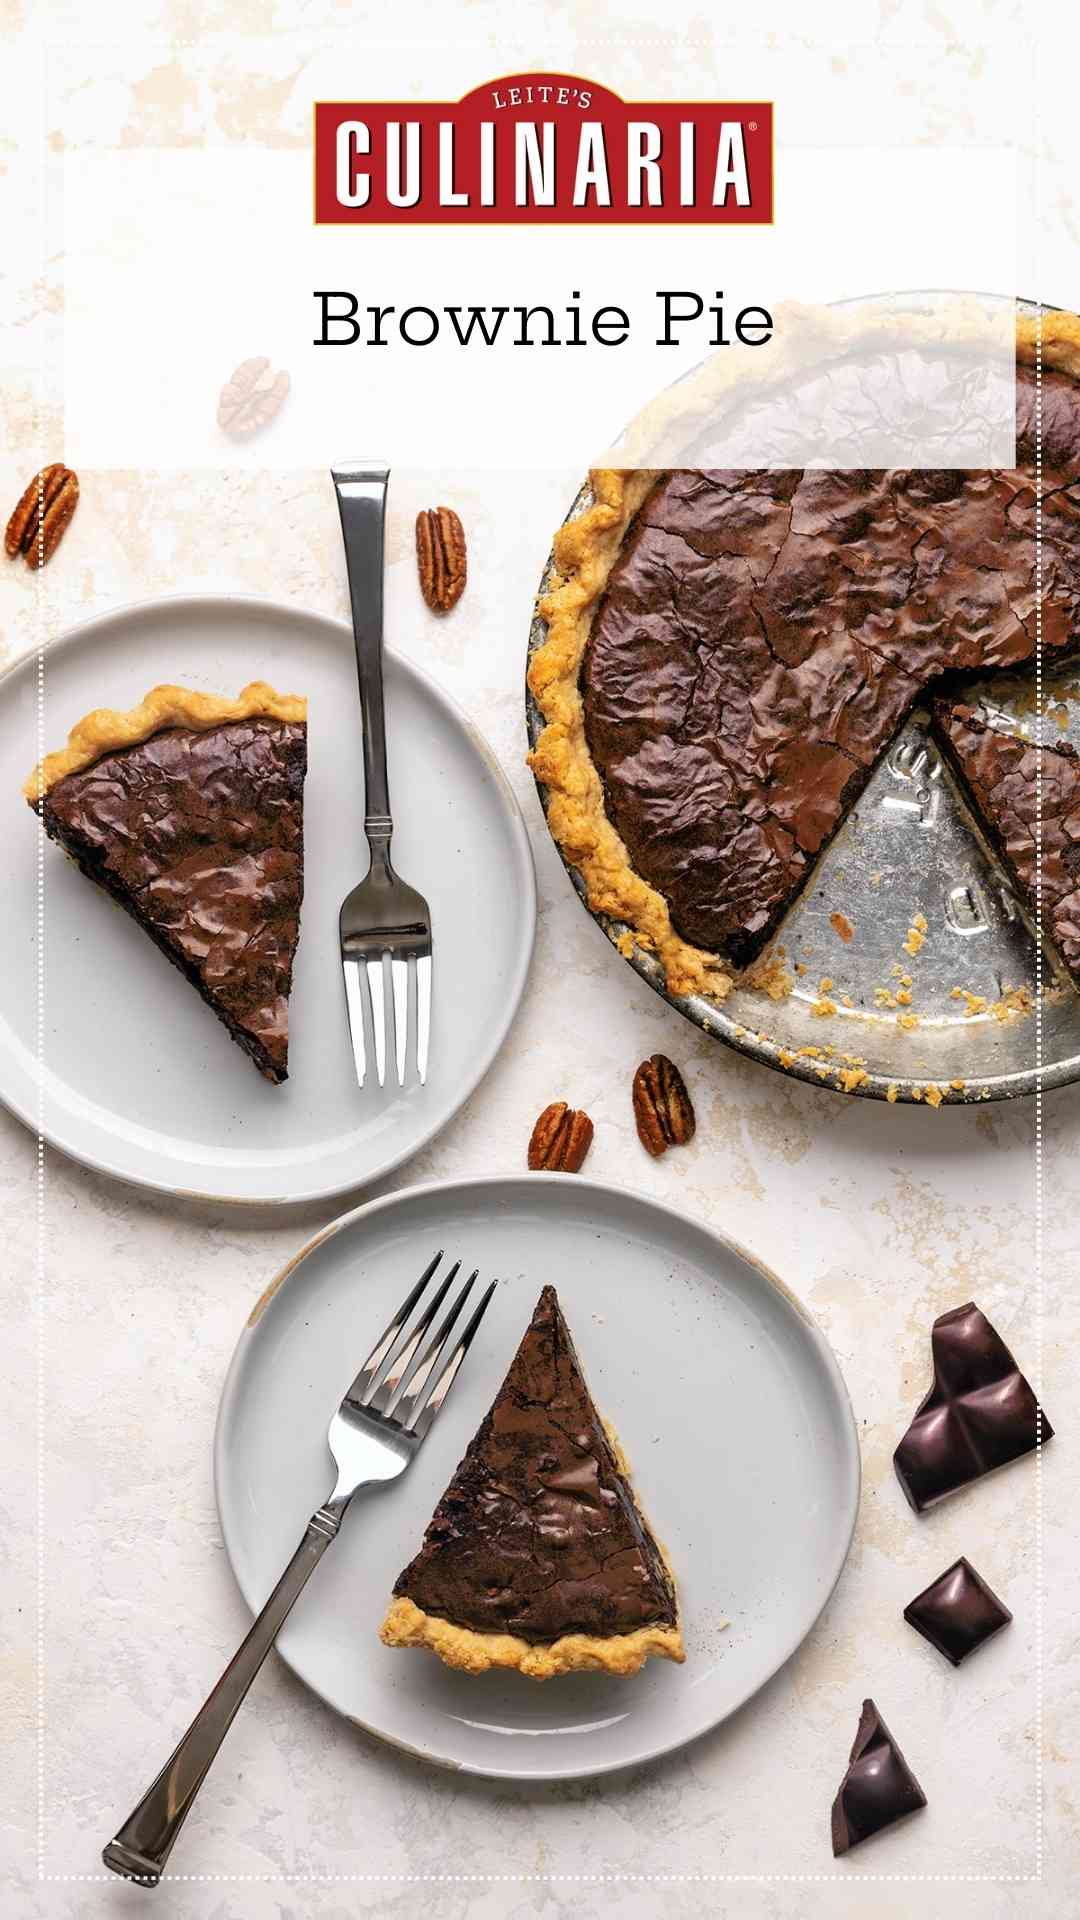 Two slices of brownie pie on plates with the remaining pie nearby.